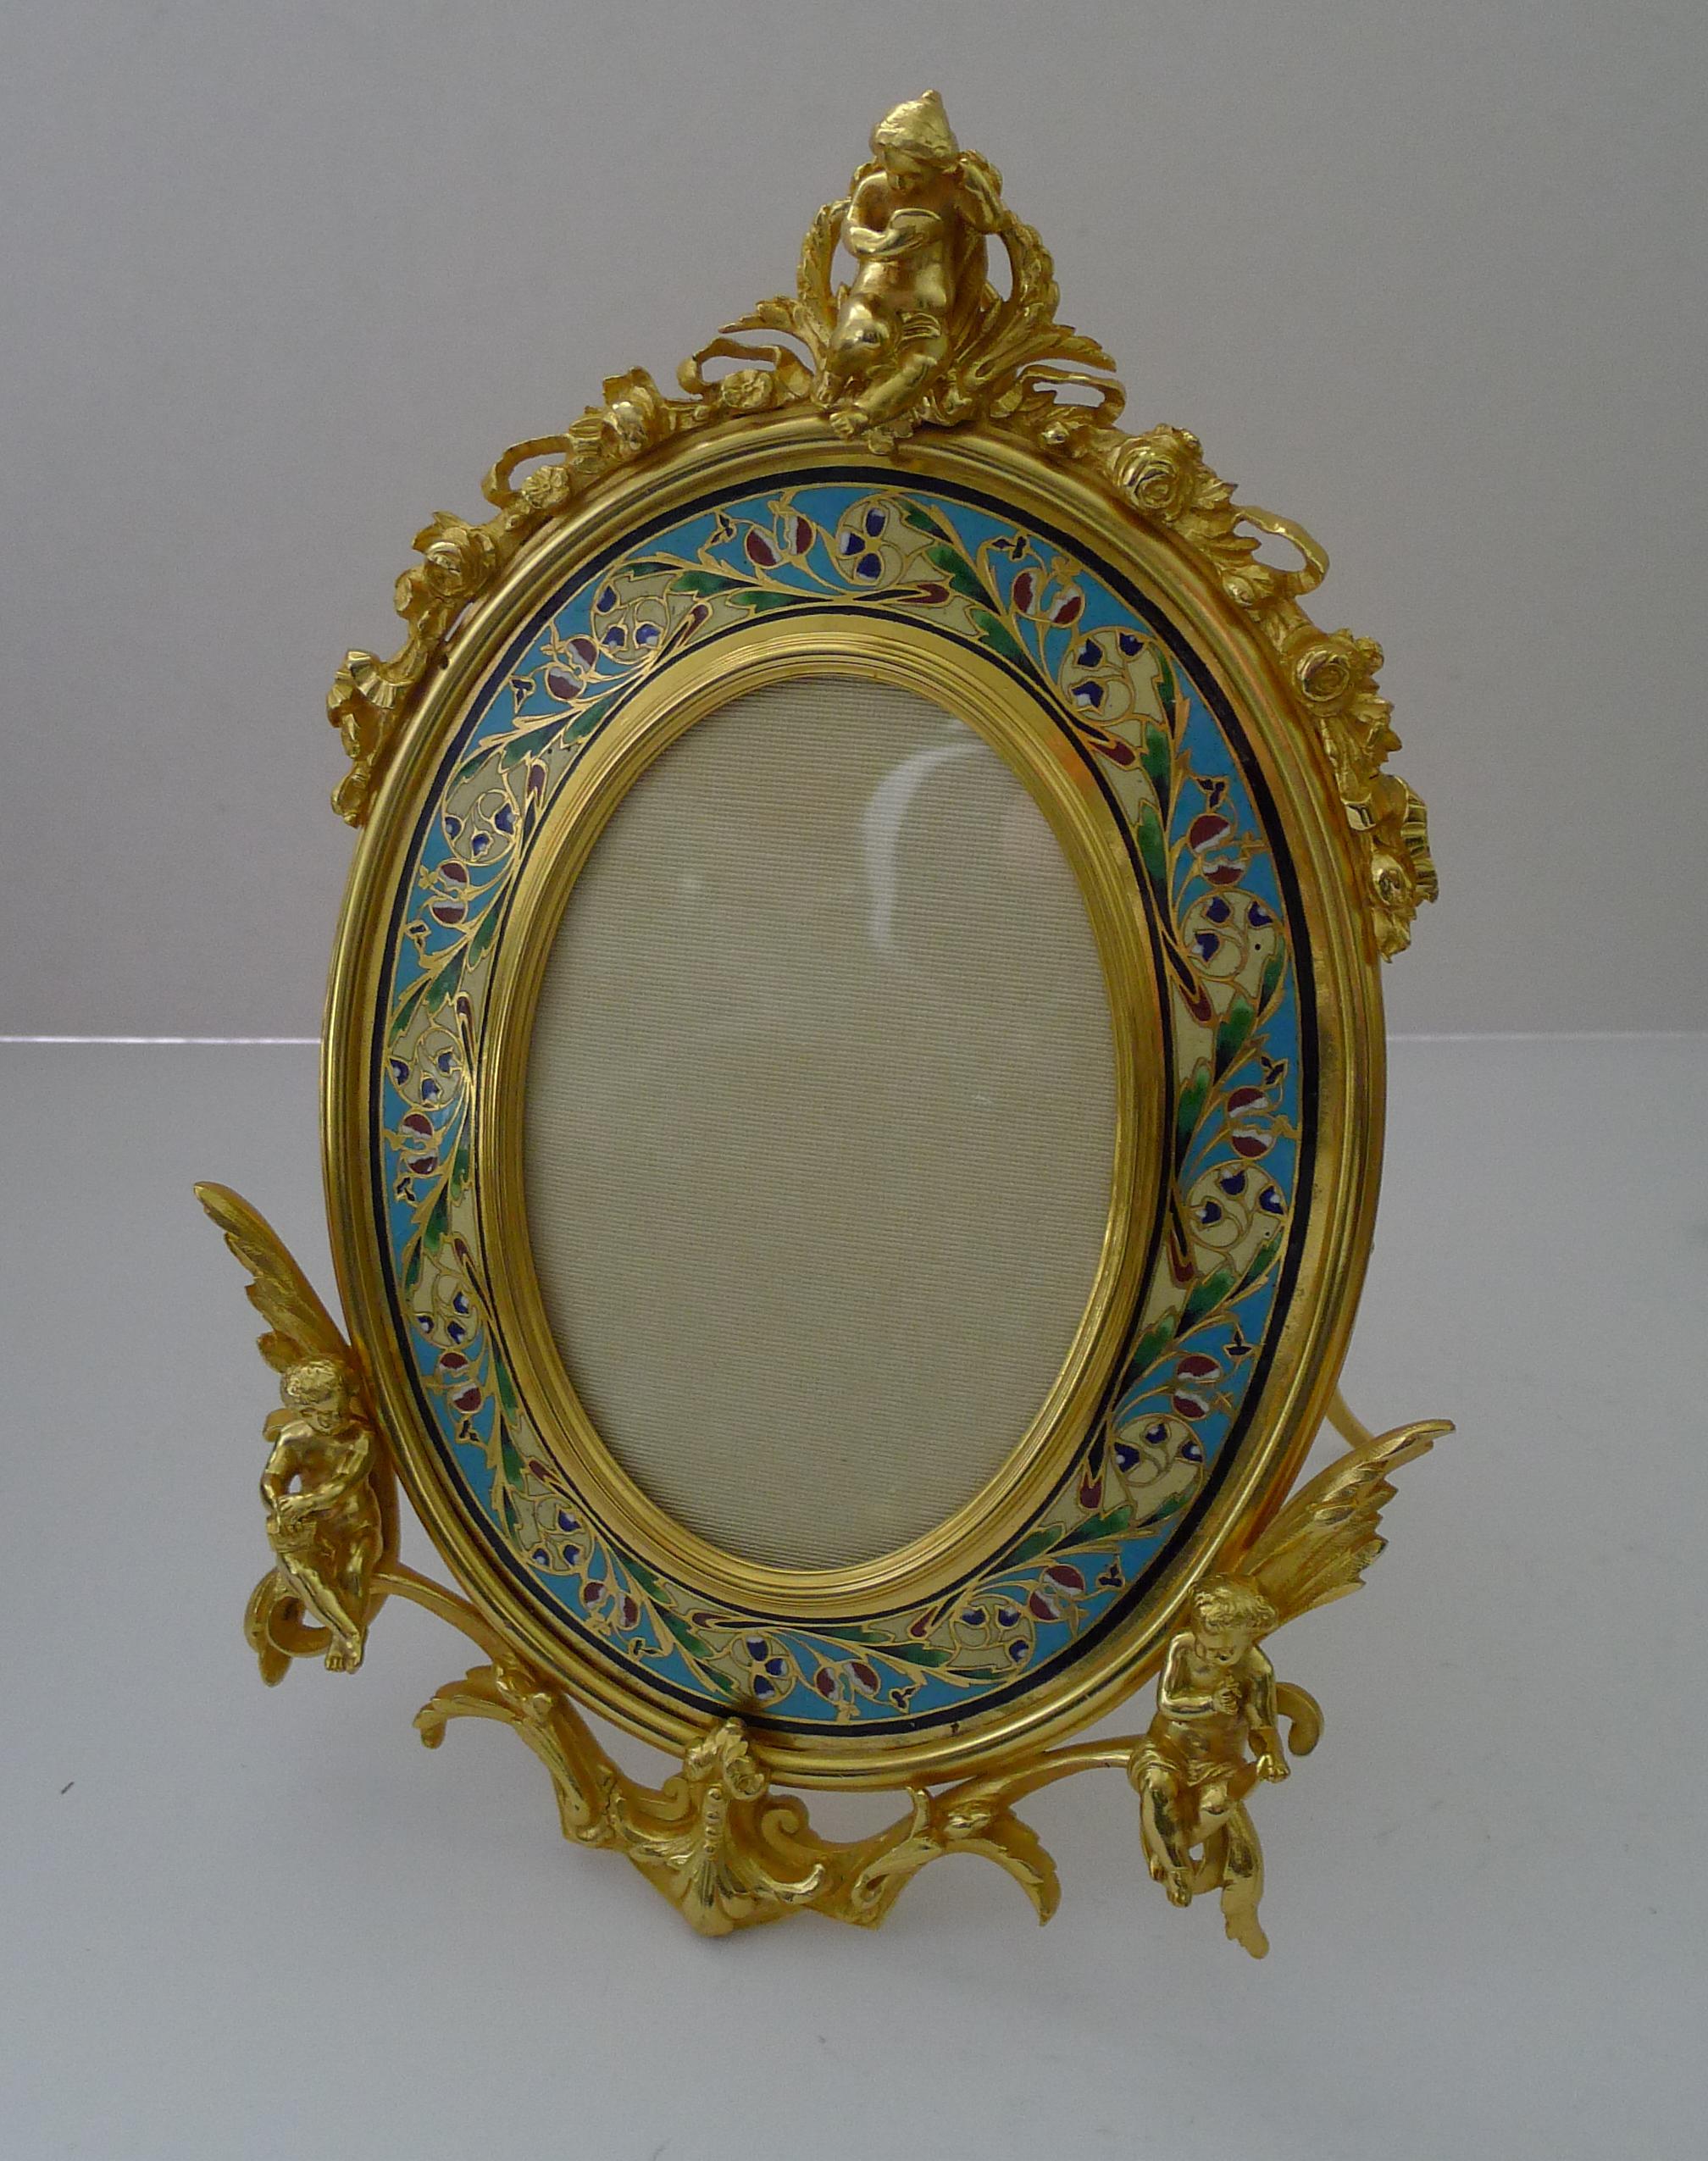 A stunning antique French Bronze Dore photograph frame standing on an easel back stand and also has a ring to the top for wall hanging if desired. The frame is decorated with champleve enamel and mounted with three stunning Cherub or Putti